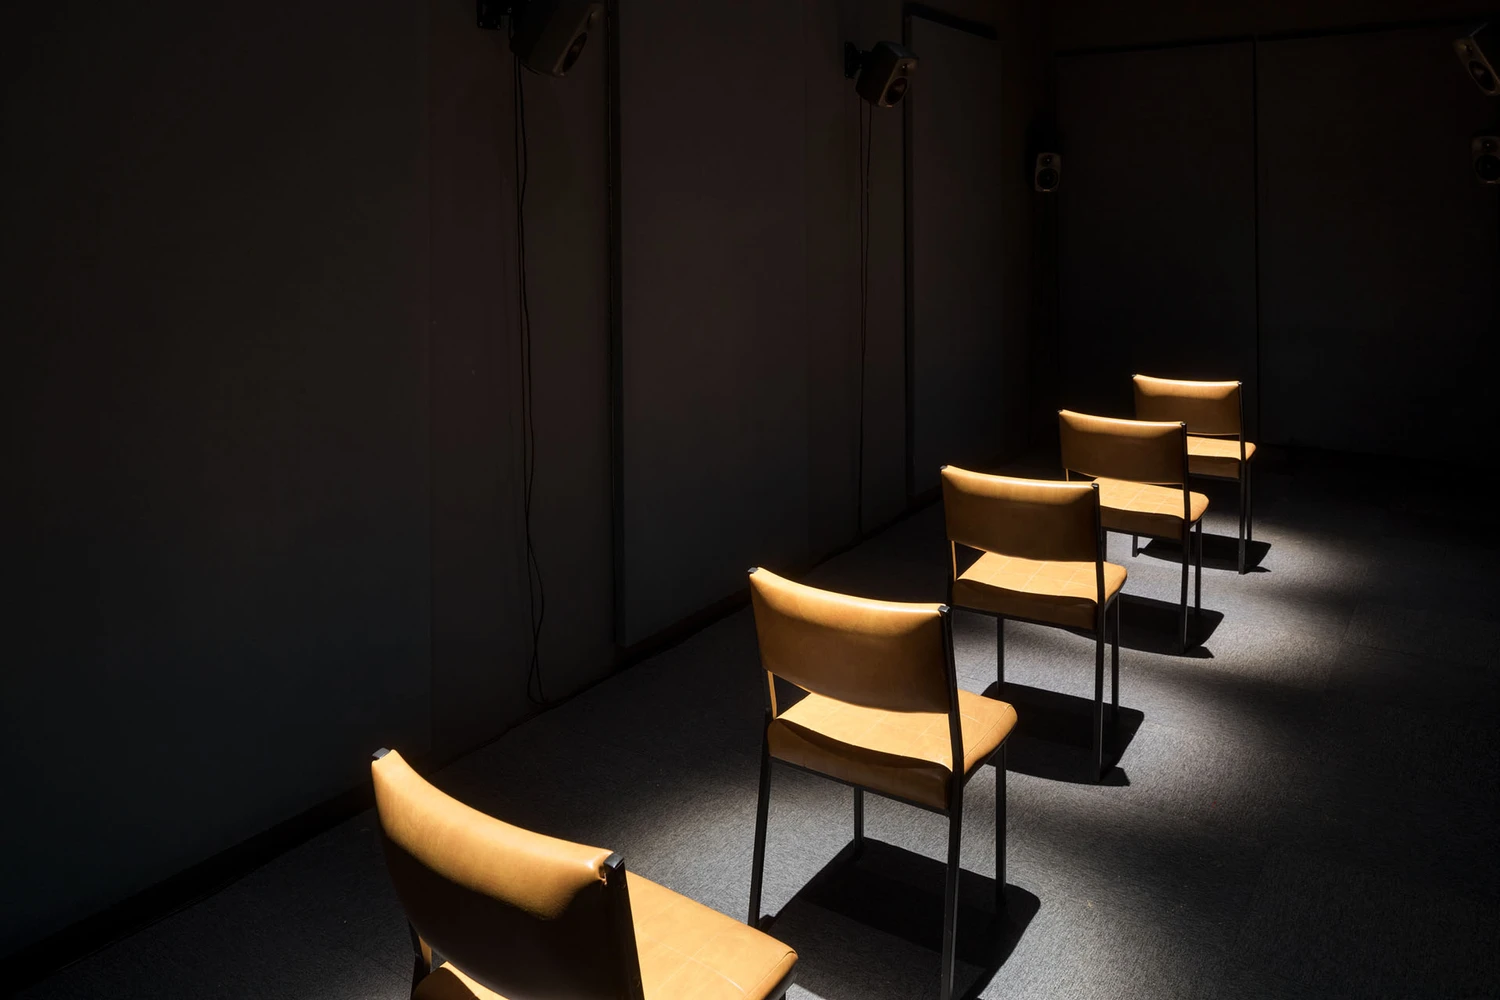 Five empty chairs are arranged in a line, facing forward. The walls of the room are blank, shadowed and unadorned, except for three speakers mounted close to the ceiling. Black cords run down from the speakers to the floor, camouflaged by darkness. The floor is paved with nondescript carpet tiles, like an office or waiting room.